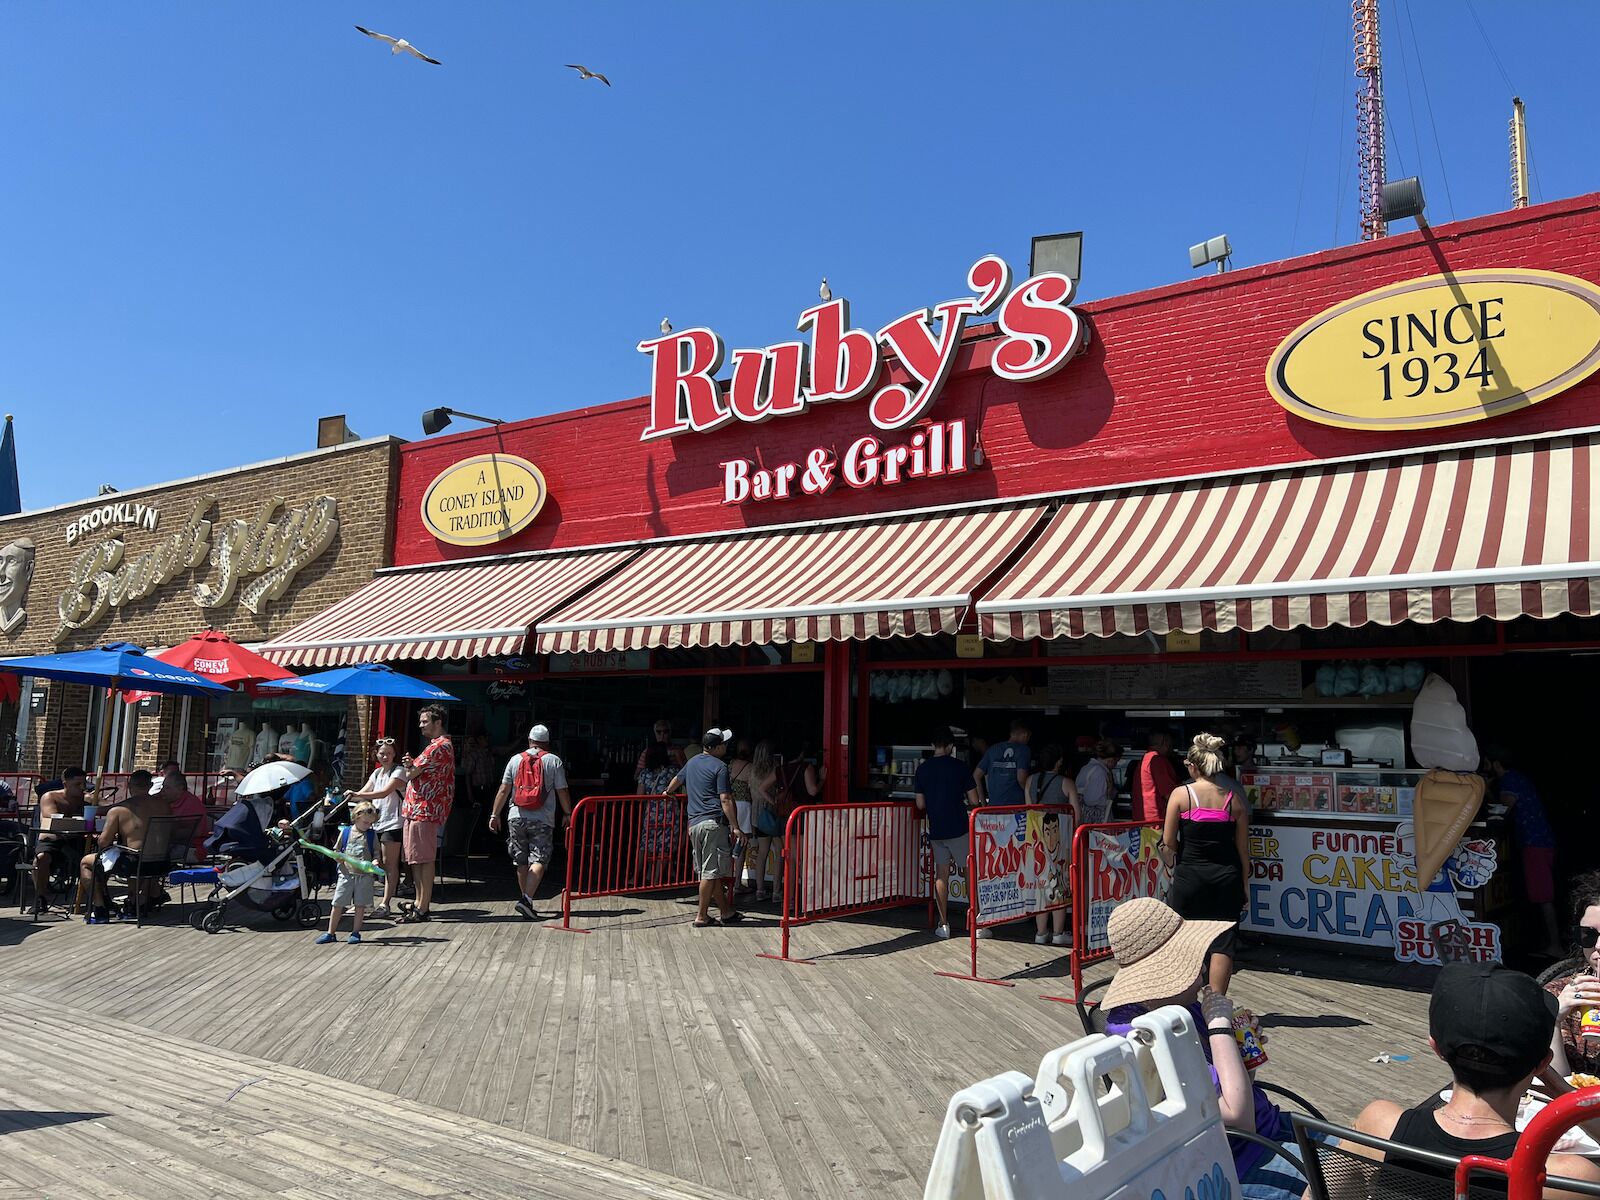 Ruby's Bar and Grill exterior -coney island boardwalk